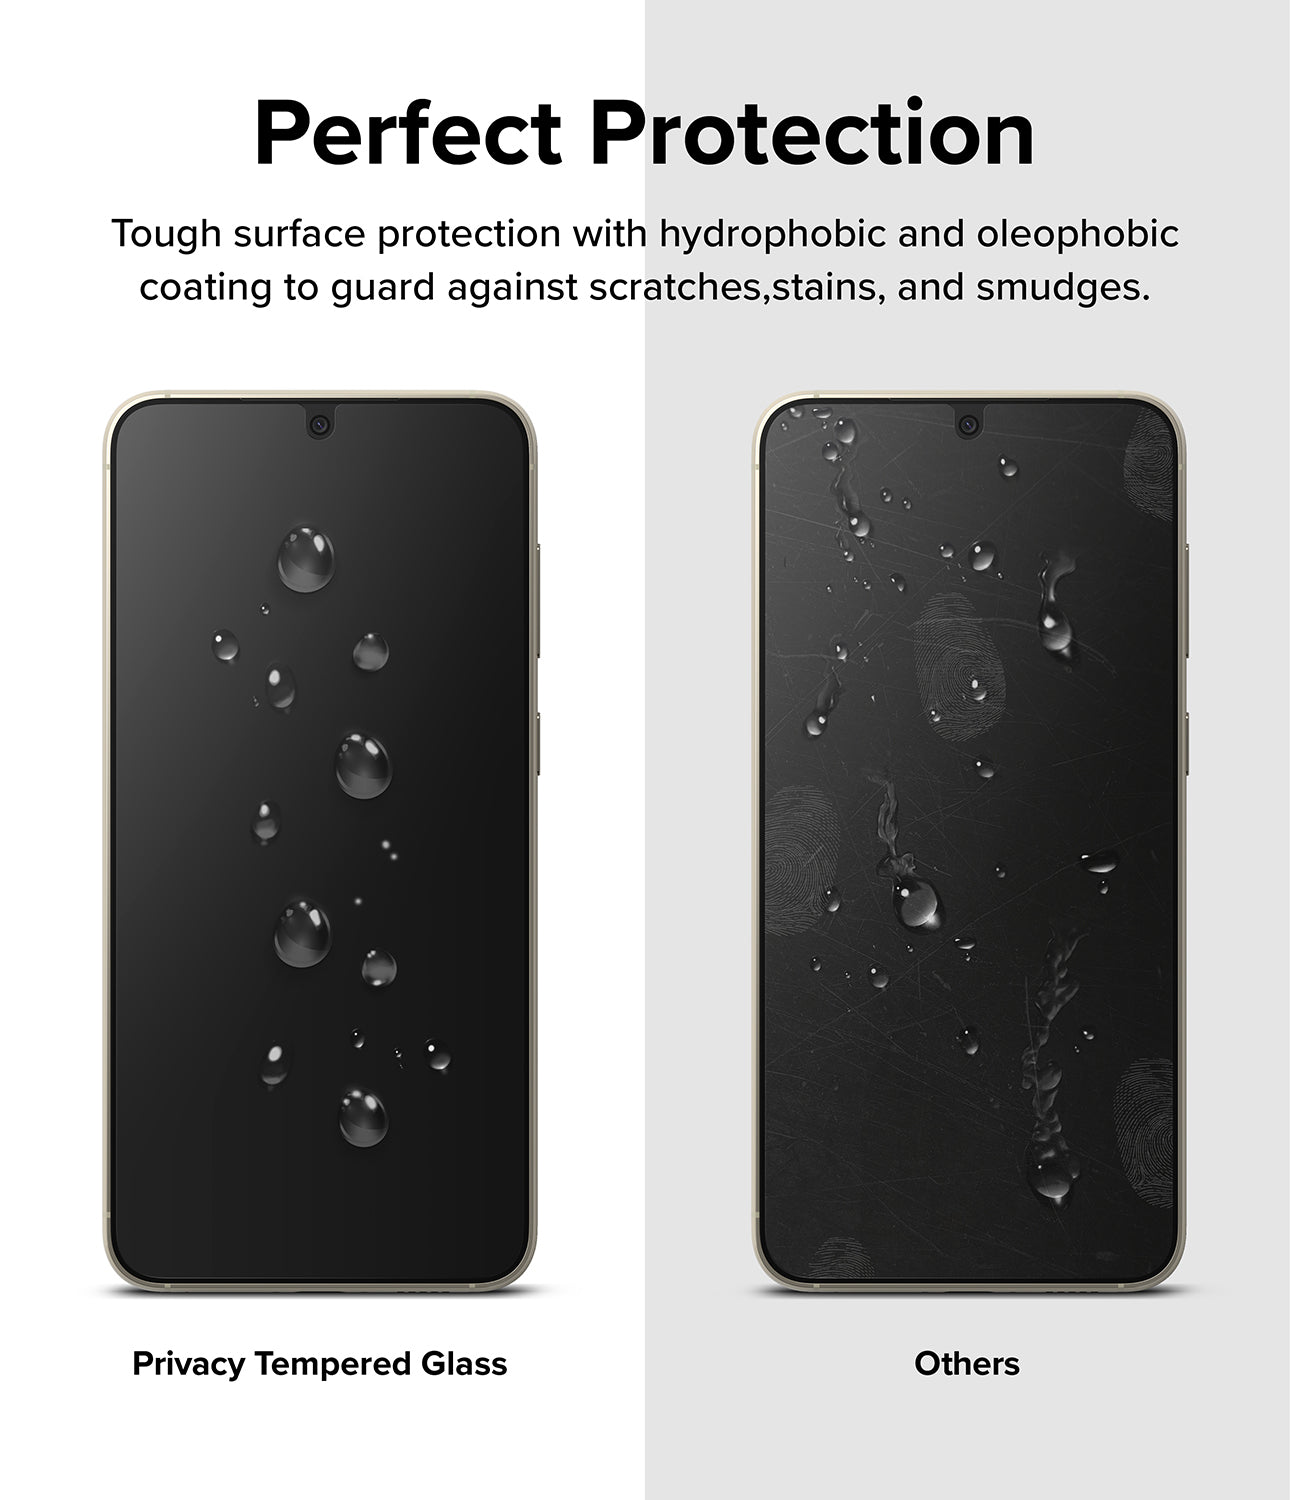 Perfect Protection l Tough surface protection with hydrophobic and oleophobic coating to guard against scratches, stains, and smudges.